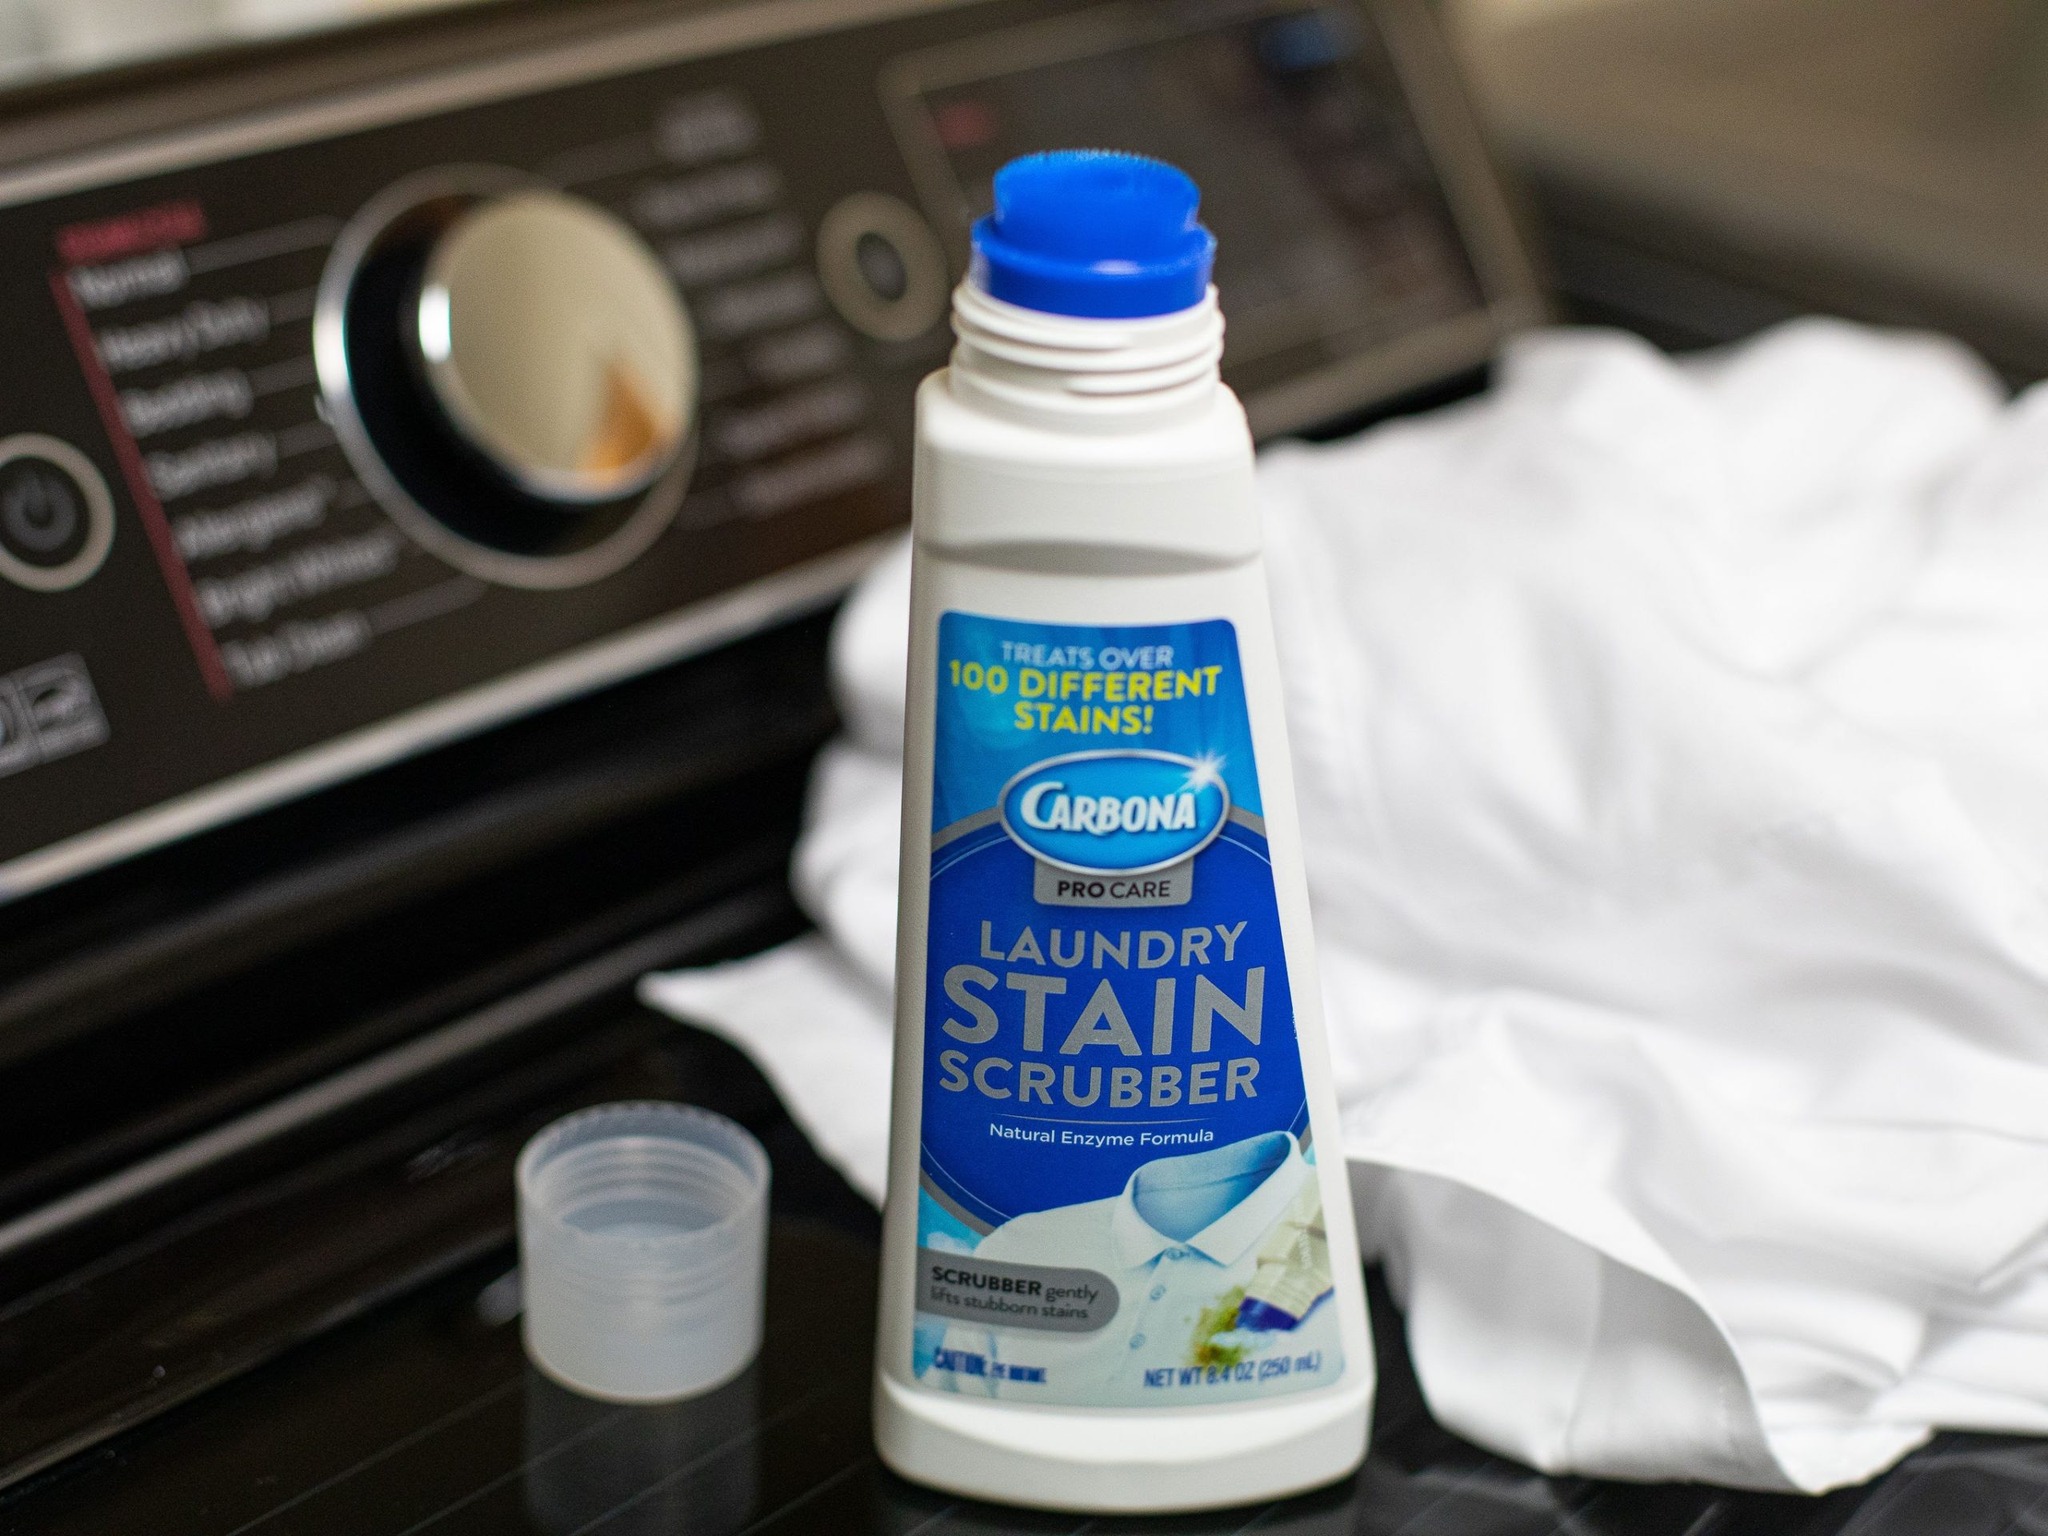 Carbona Pro Care Laundry Stain Scrubber Just 95¢ At Publix - iHeartPublix